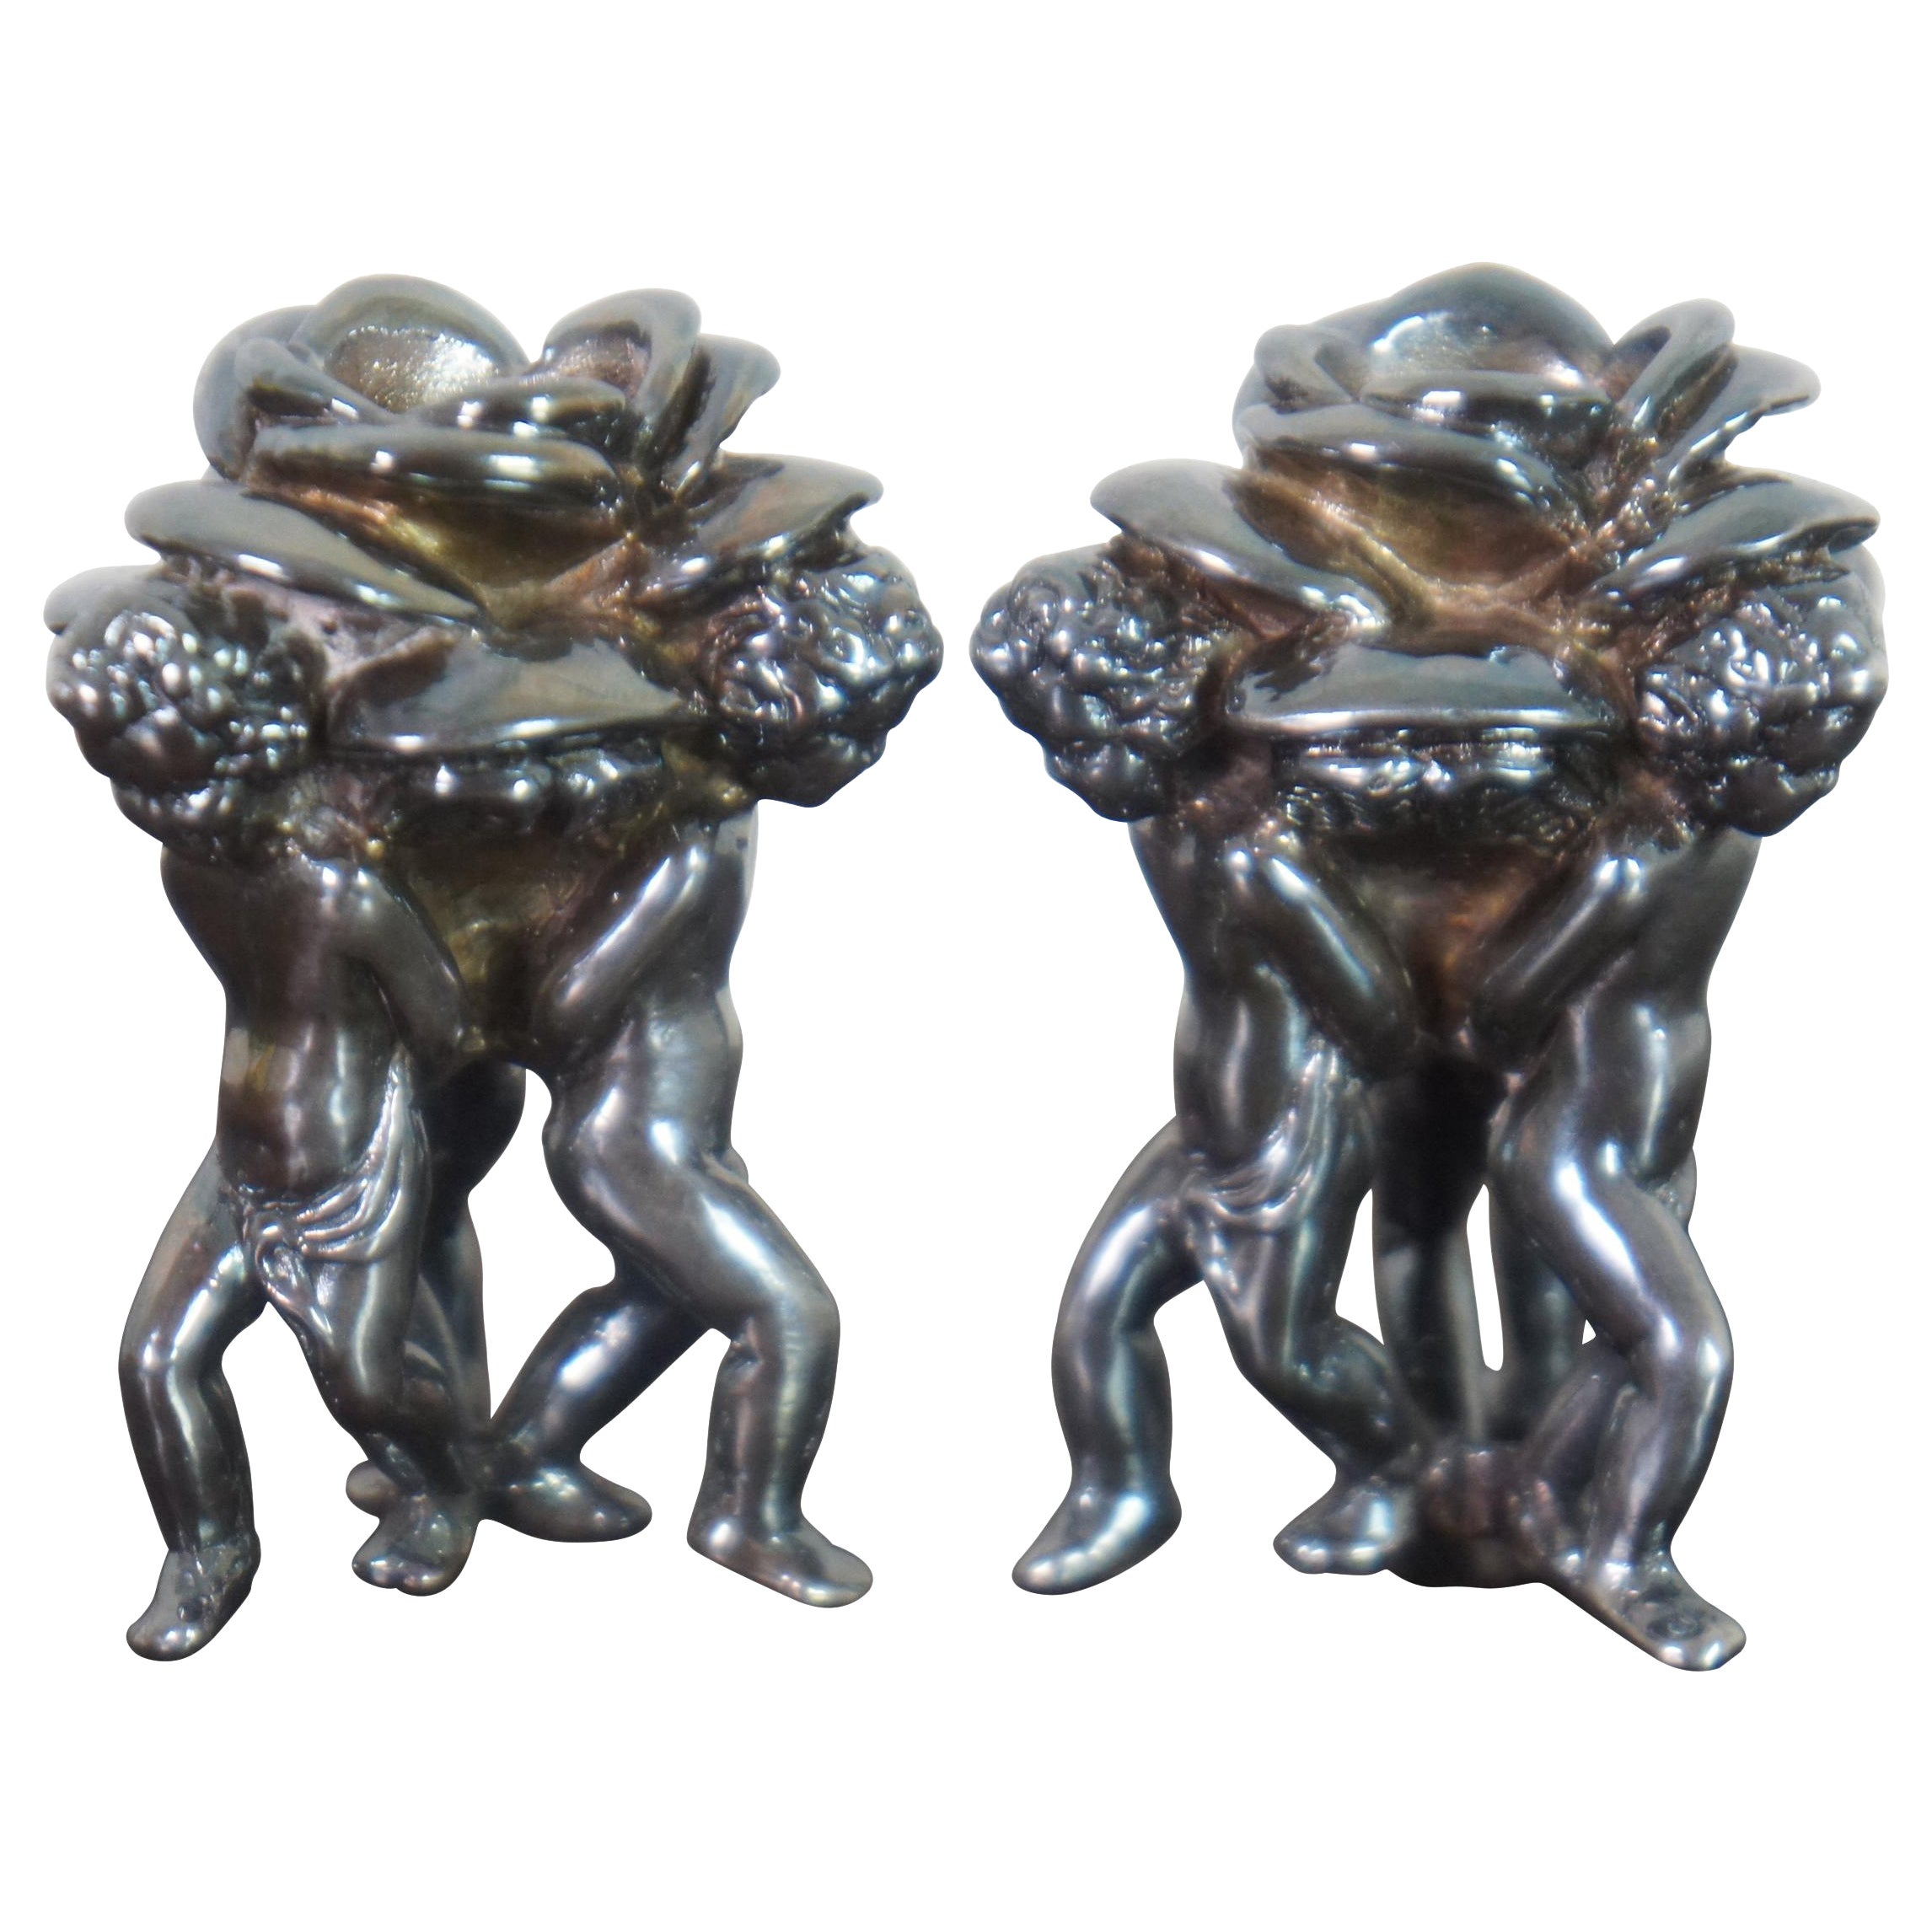 2 Vintage Sterling Silver 925 Cherub Angel Putti Rose Taper Candle Holders 2.5"